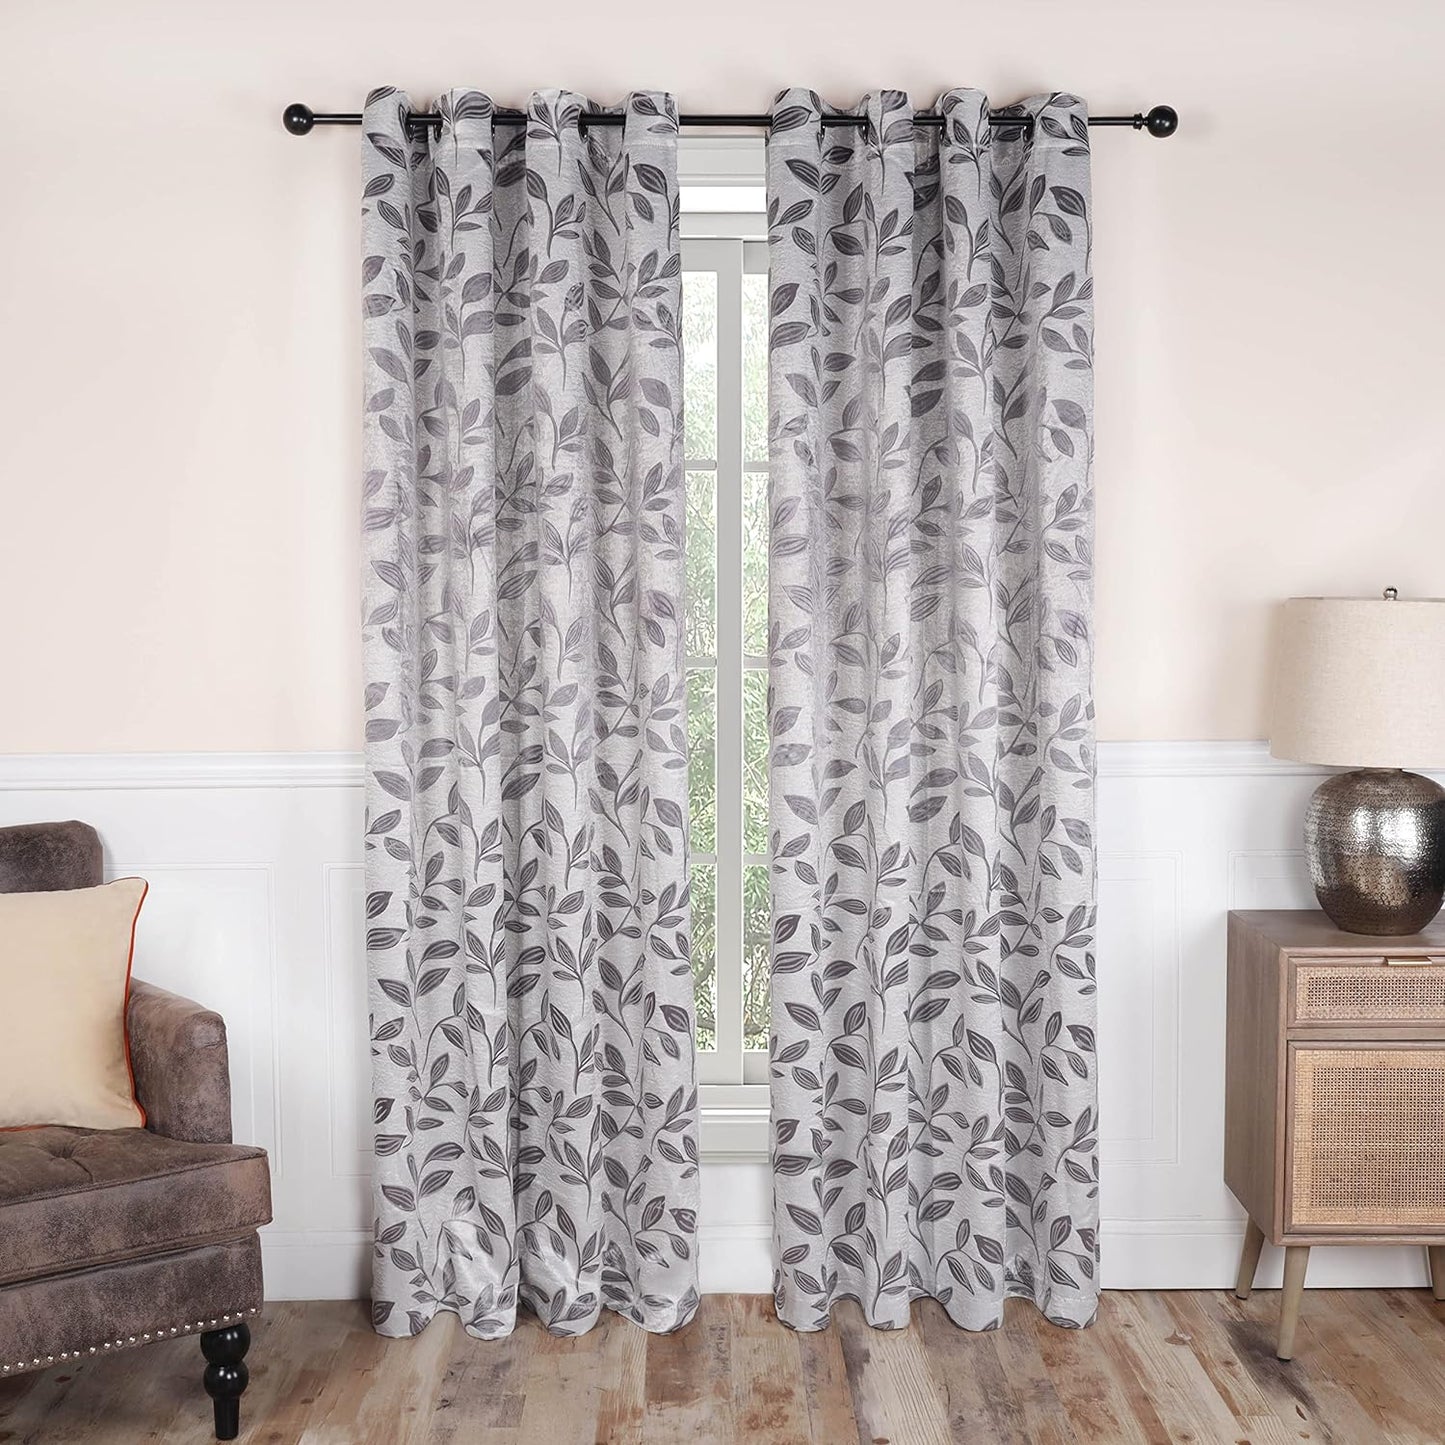 Superior Blackout Curtains, Room Darkening Window Accent for Bedroom, Sun Blocking, Thermal, Modern Bohemian Curtains, Leaves Collection, Set of 2 Panels, Rod Pocket - 52 in X 63 In, Nickel Black  Home City Inc. White-Grey 52 In X 108 In (W X L) 